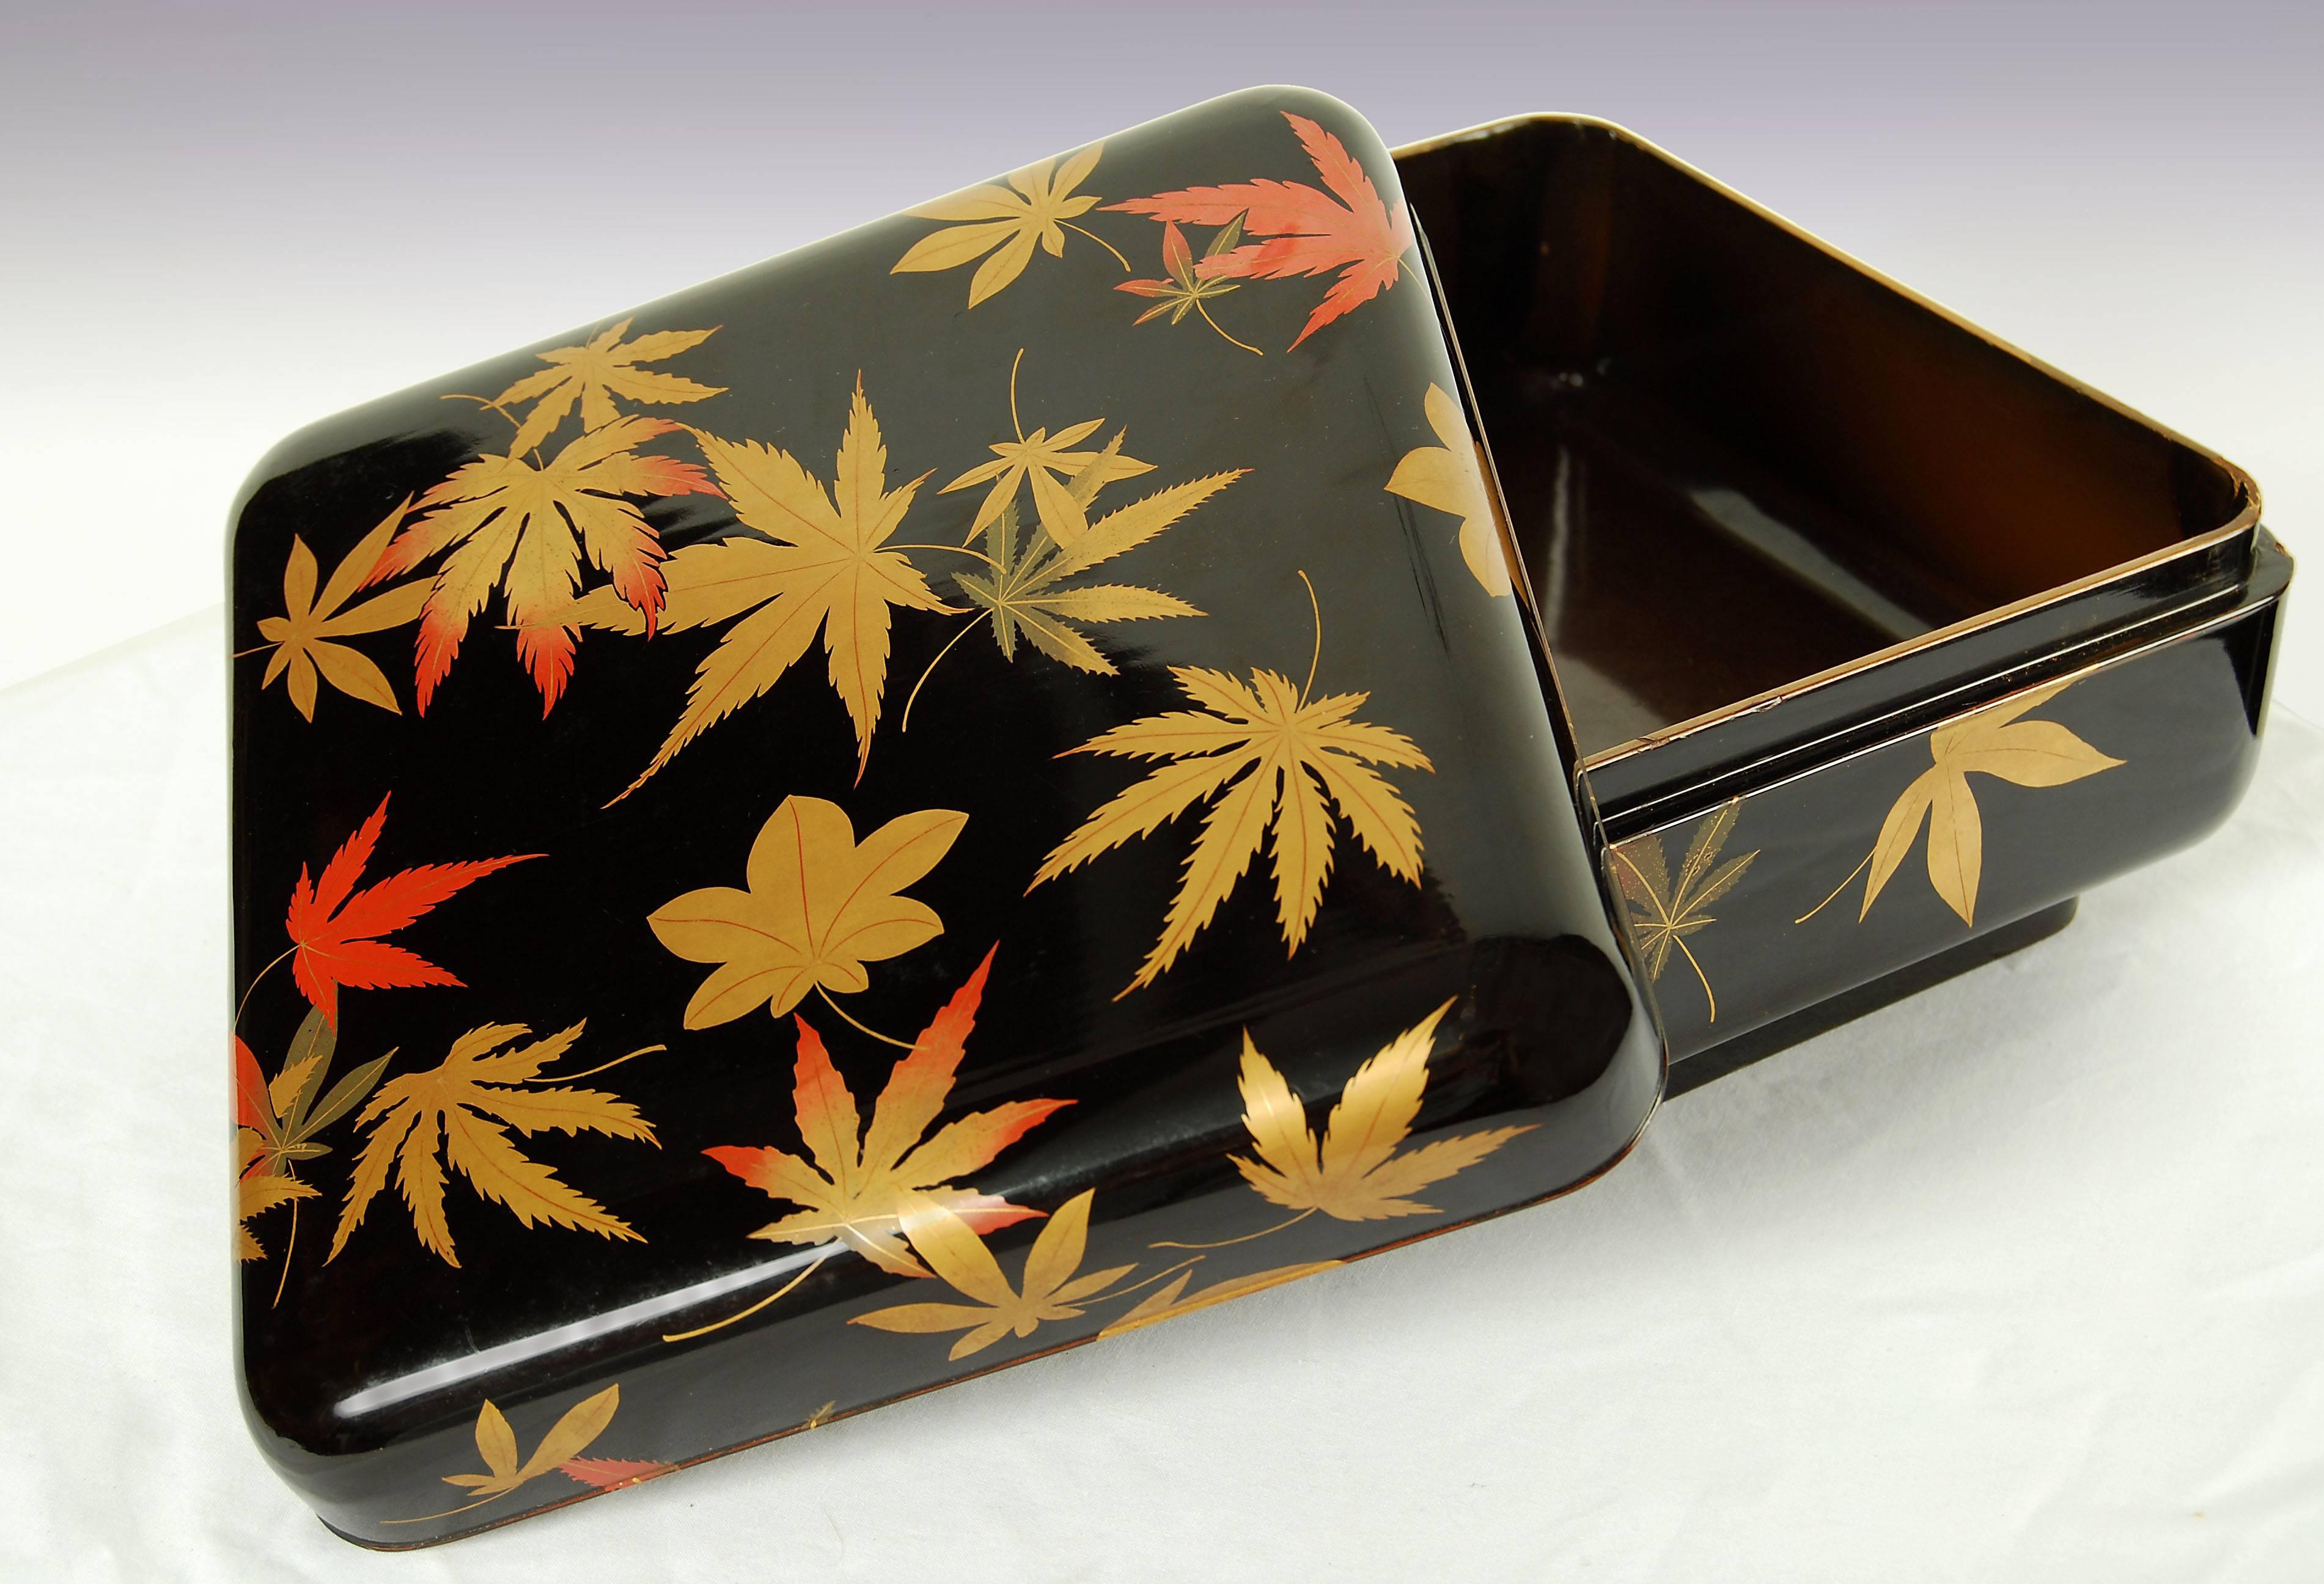 Gold Leaf Japanese Lacquer Box with Maple Leaf Design, circa 20th Century